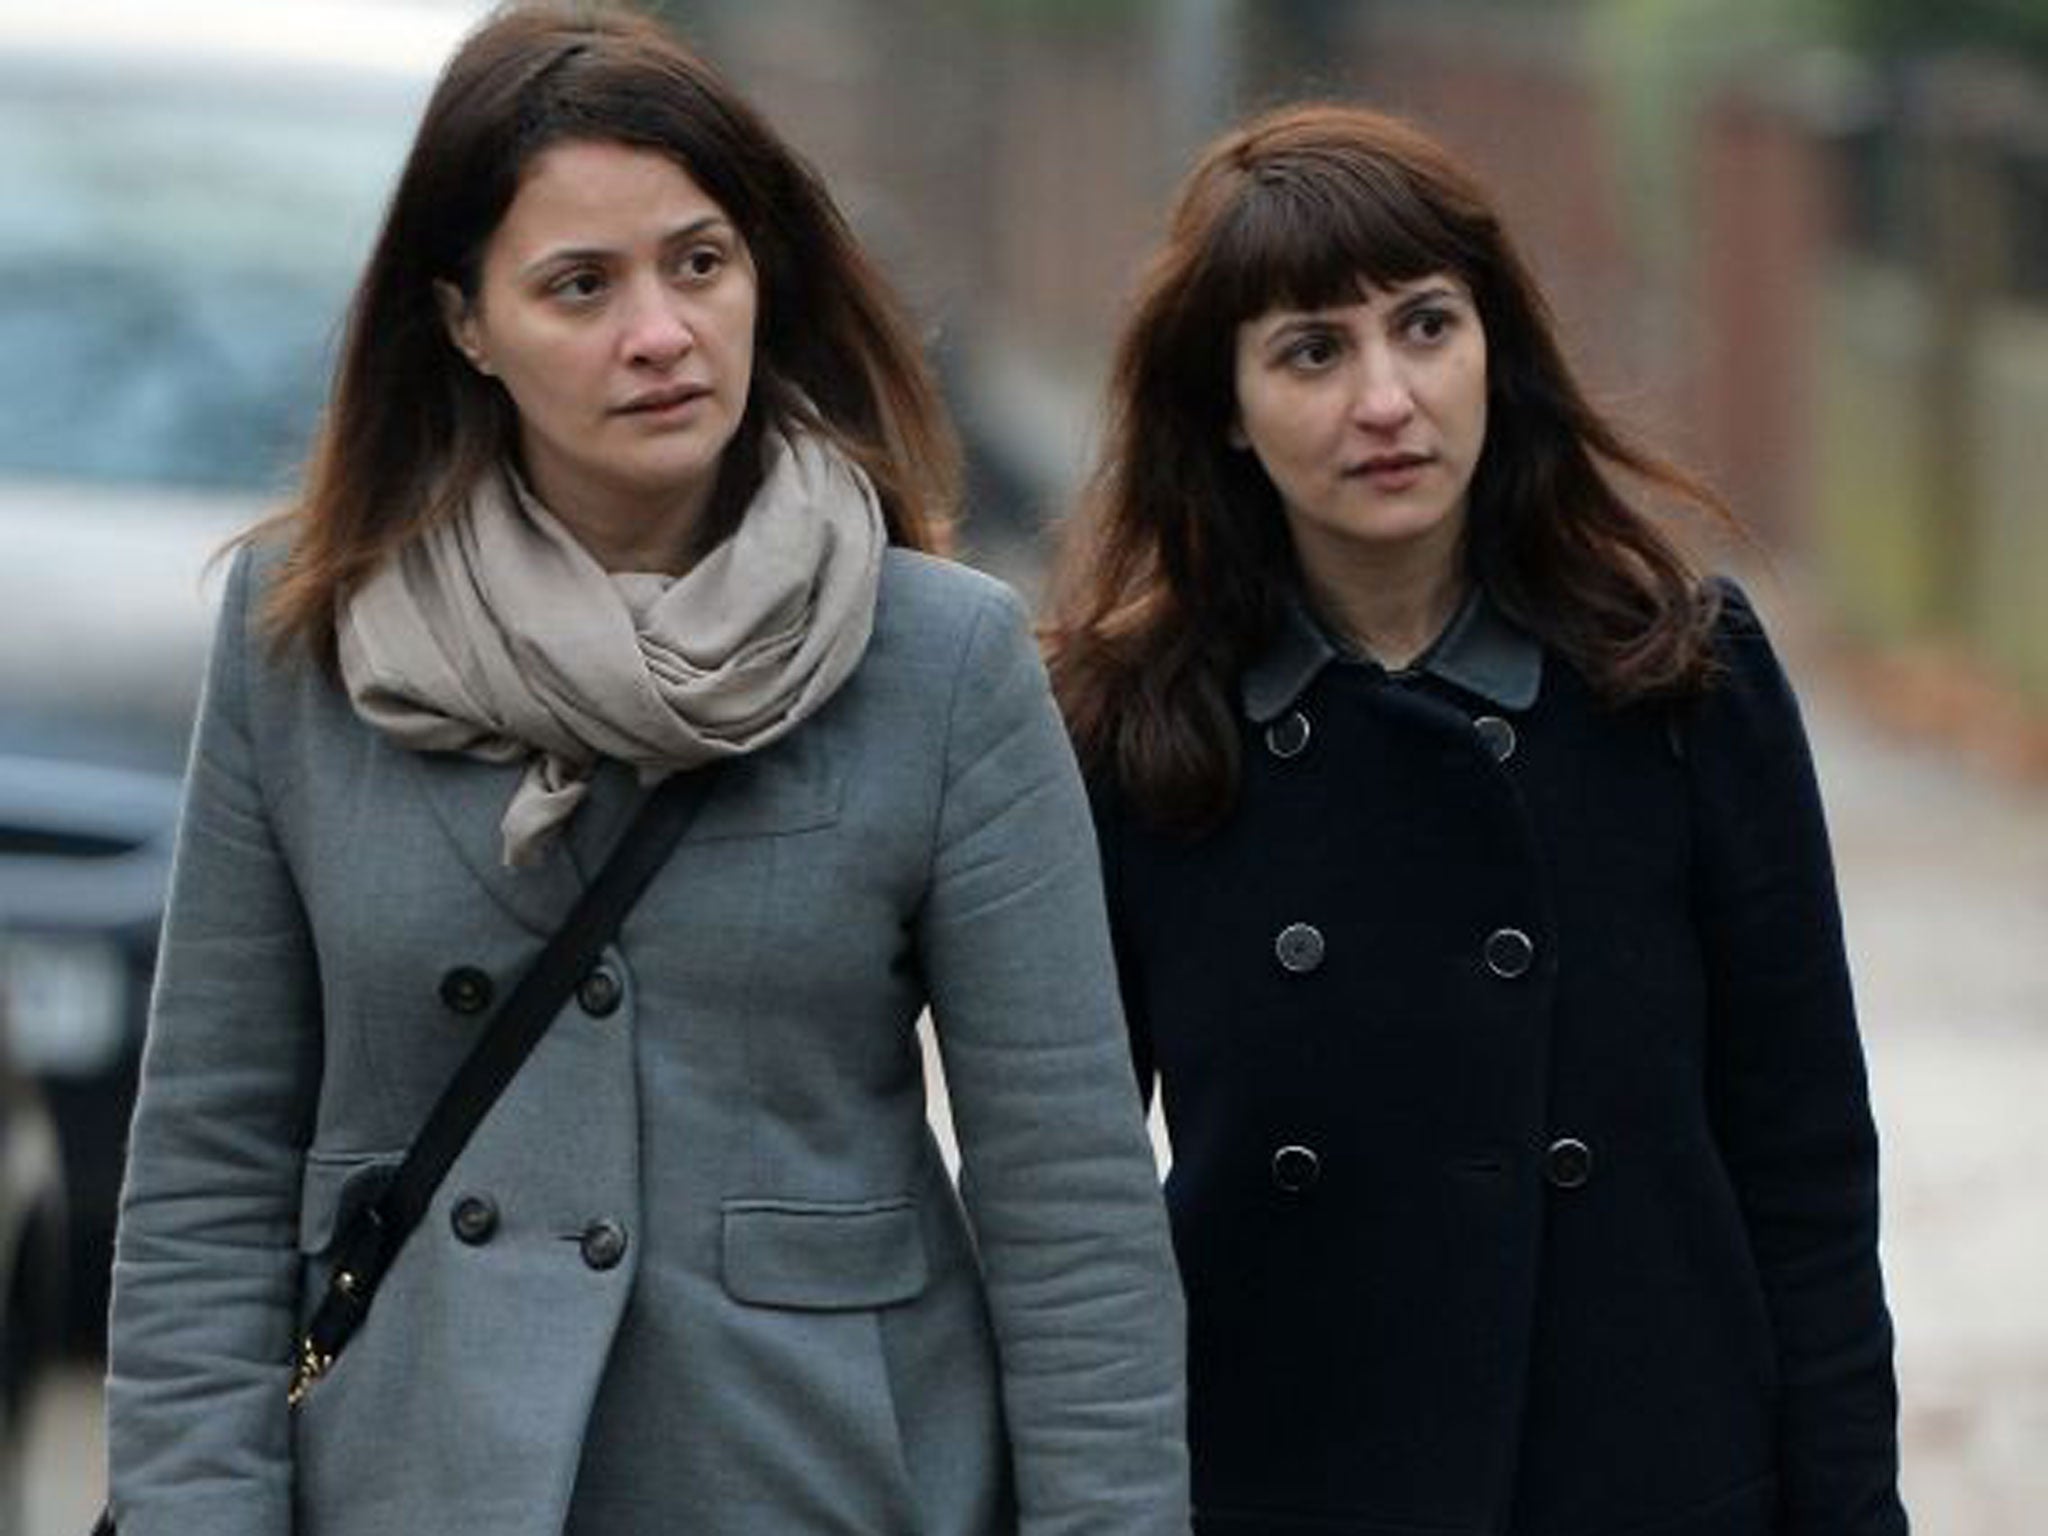 Sisters Elisabetta (left) and Francesca Grillo, former personal assistants to Charles Saatchi and Nigella Lawson